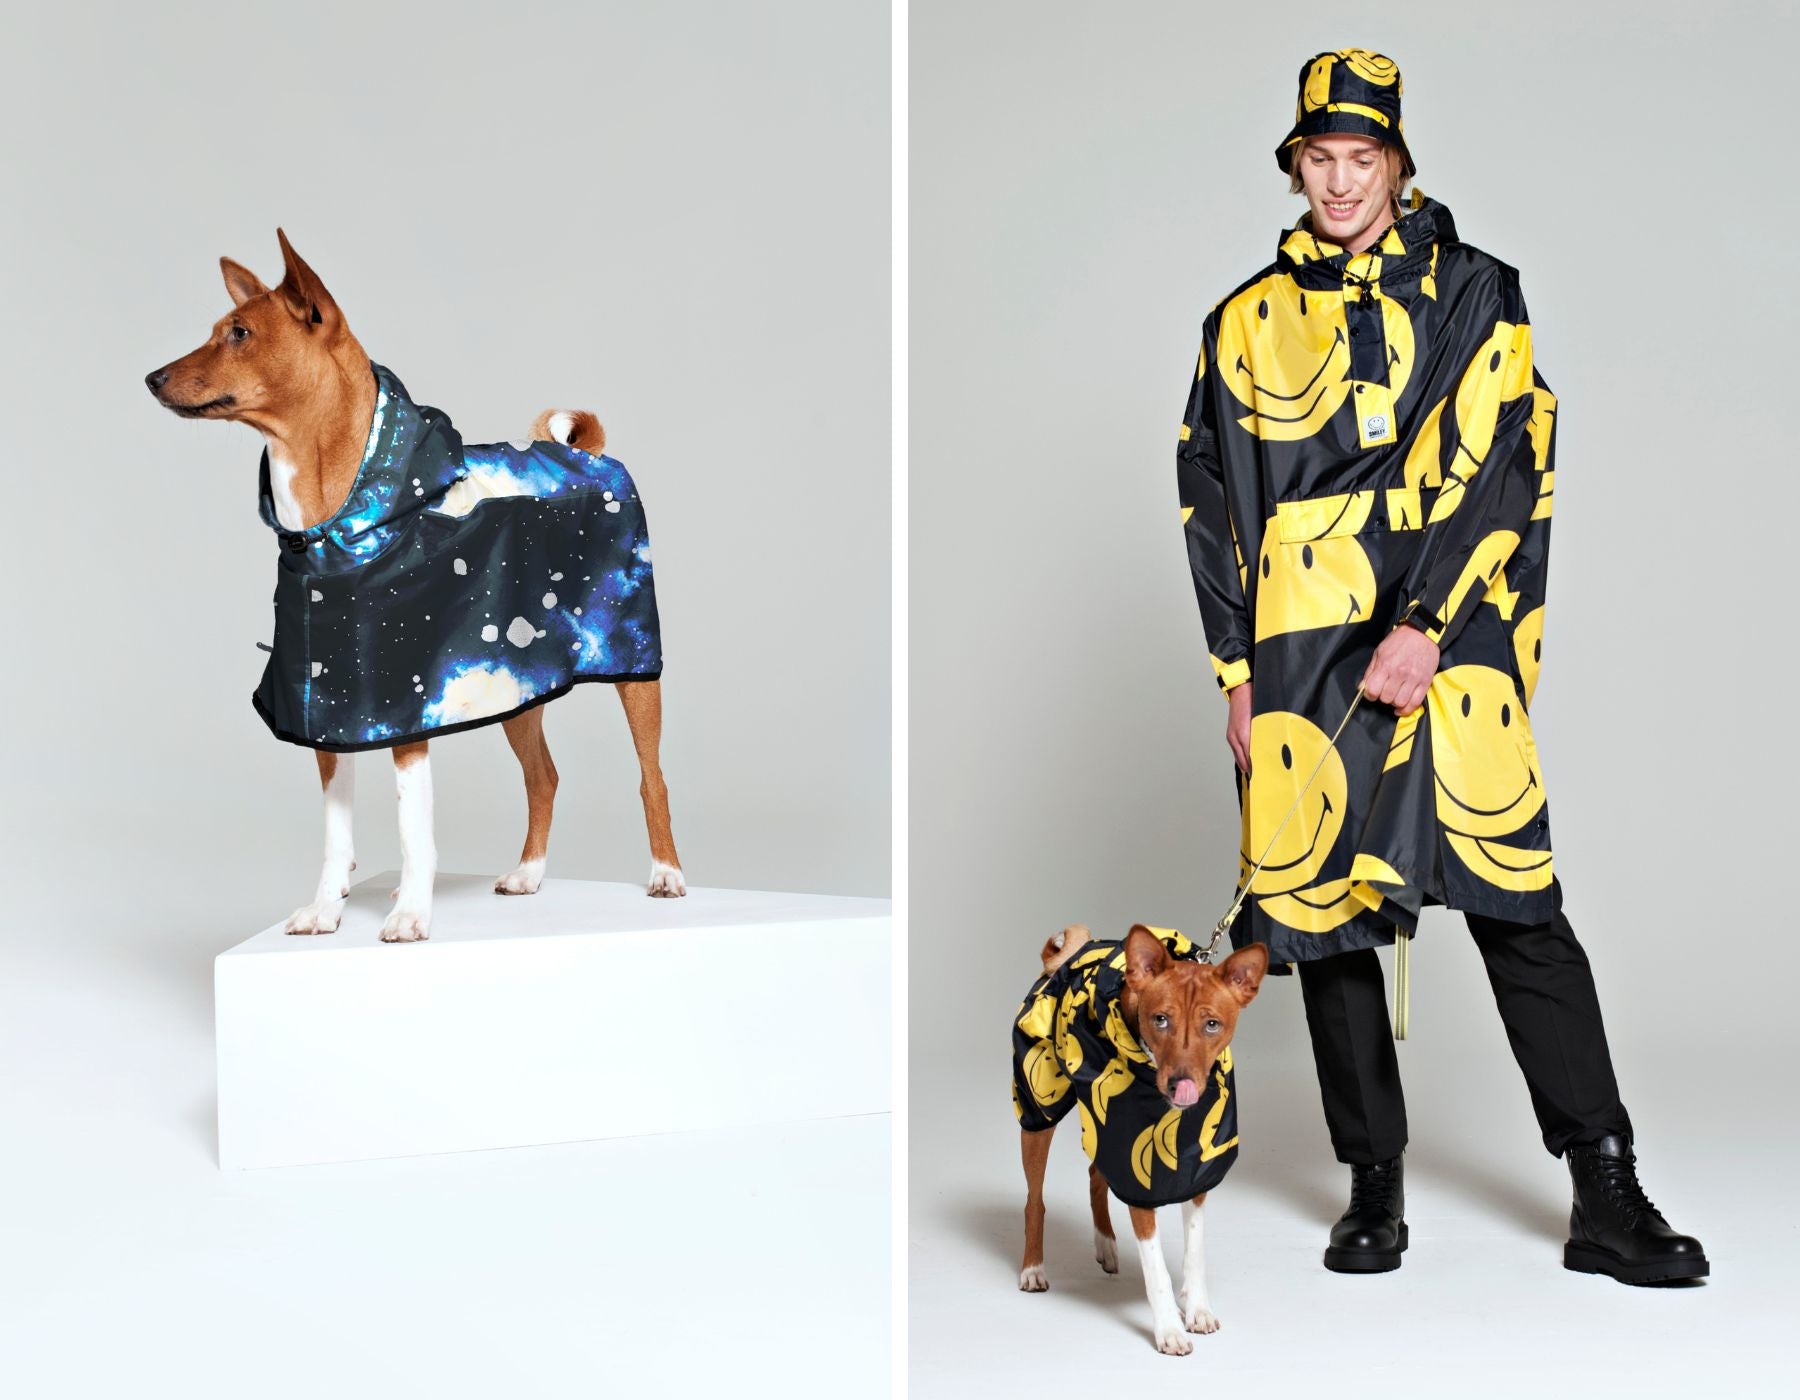 Rainkiss blue rain poncho for dogs, next to a Smiley-patterned rain poncho for both humans and dogs